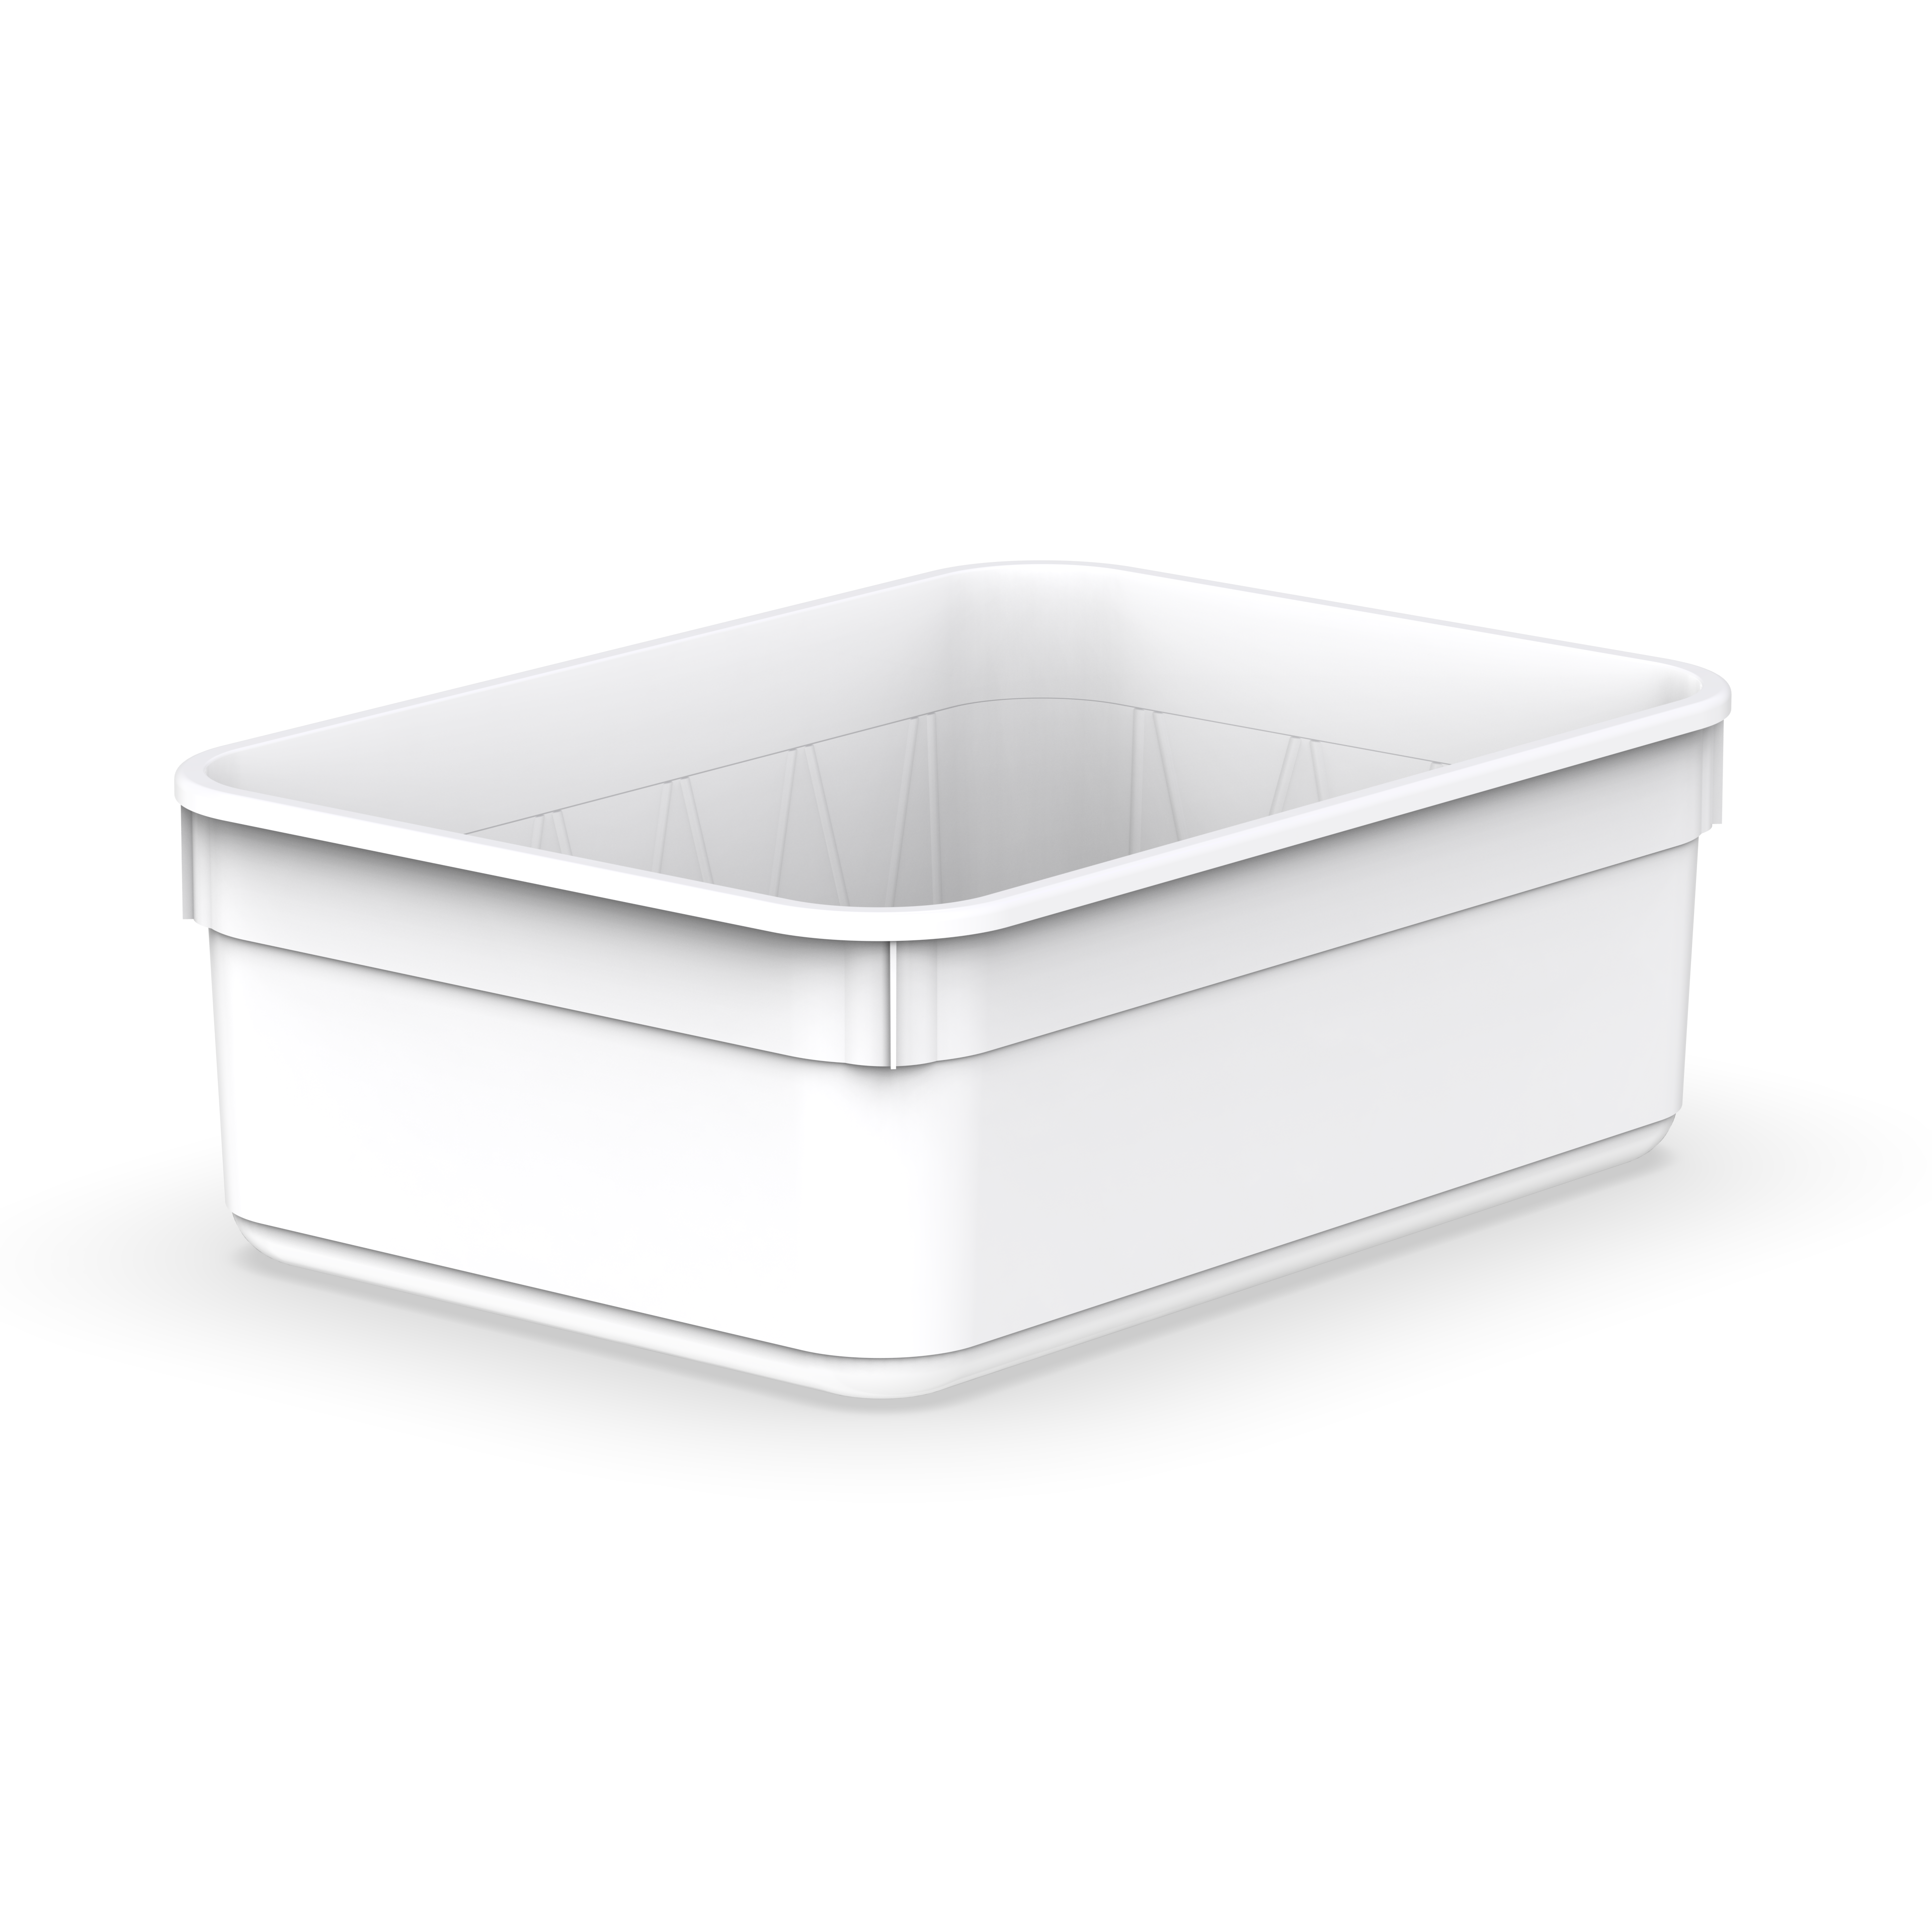 https://www.berryglobal.com/-/media/Berry/Images/Products/Berry-Global/2000ml-223mmx162mm-Ice-Cream-Tub-13824899/mr_1659001_ice_cream_tub_2000ml_13824899.ashx